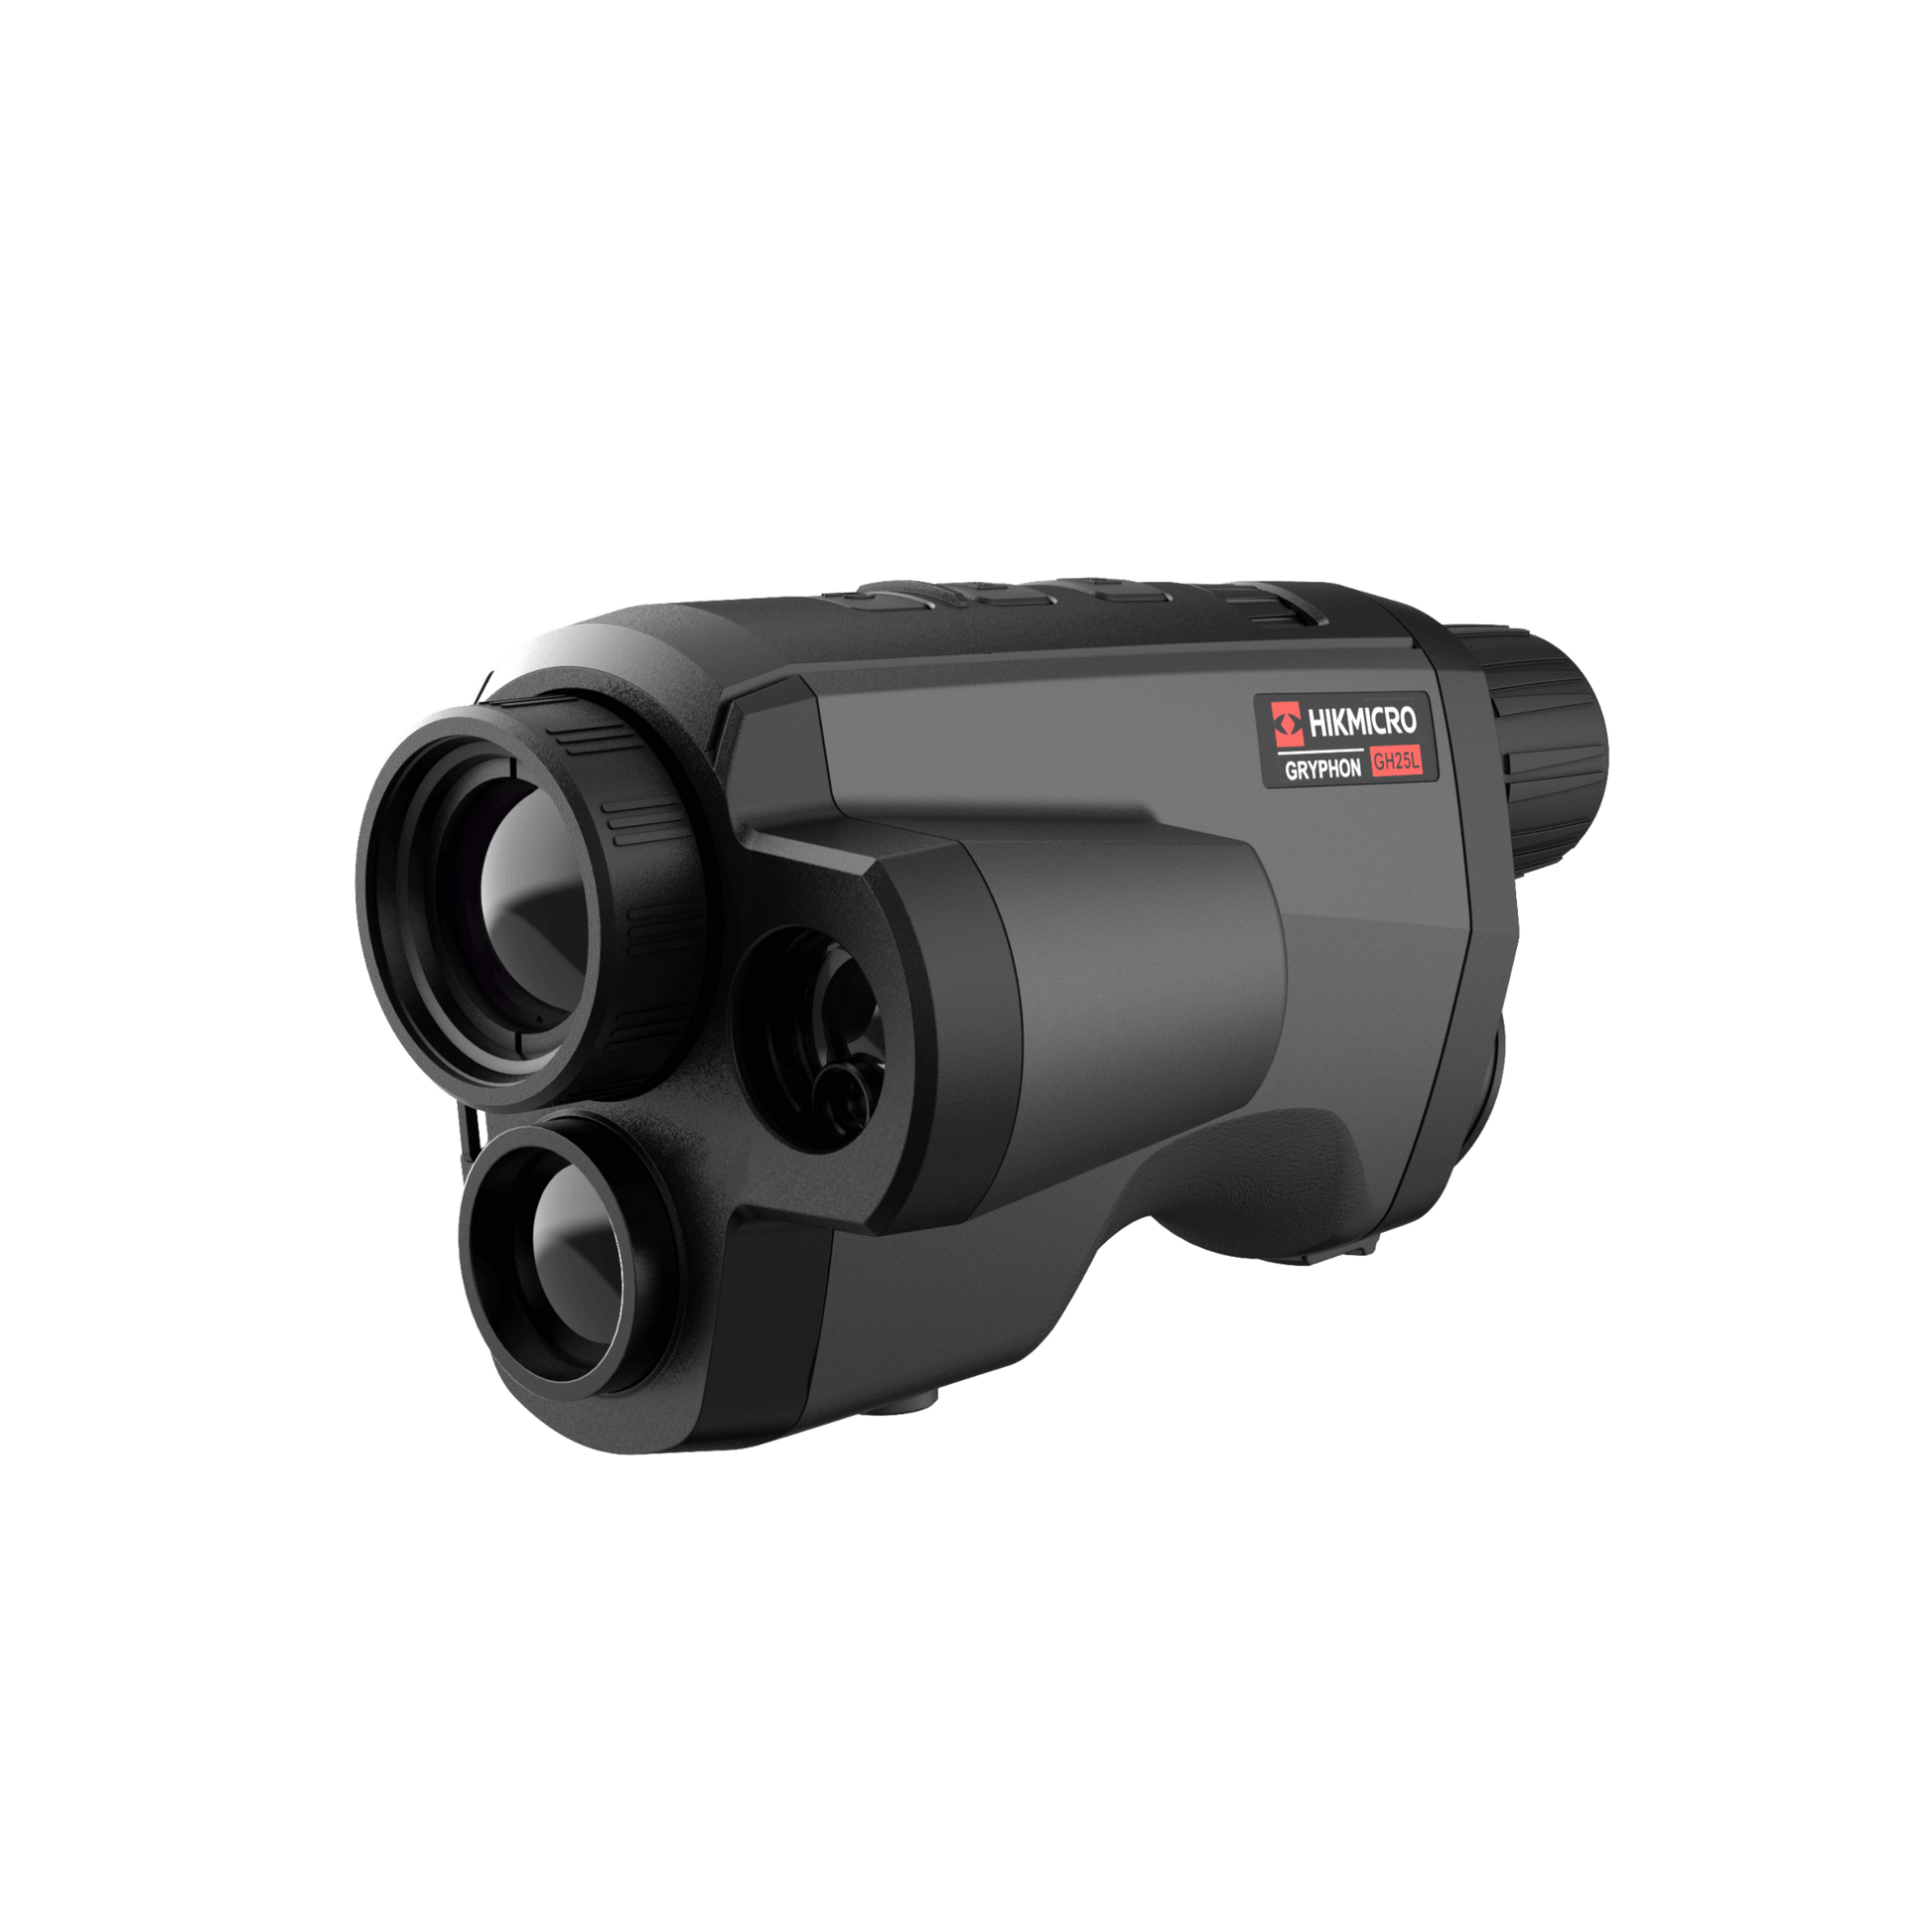 Cape Thermal imaging monocular for sale - HikMicro Gryphon GH25L Handheld thermal monocular front left view with laser range finder